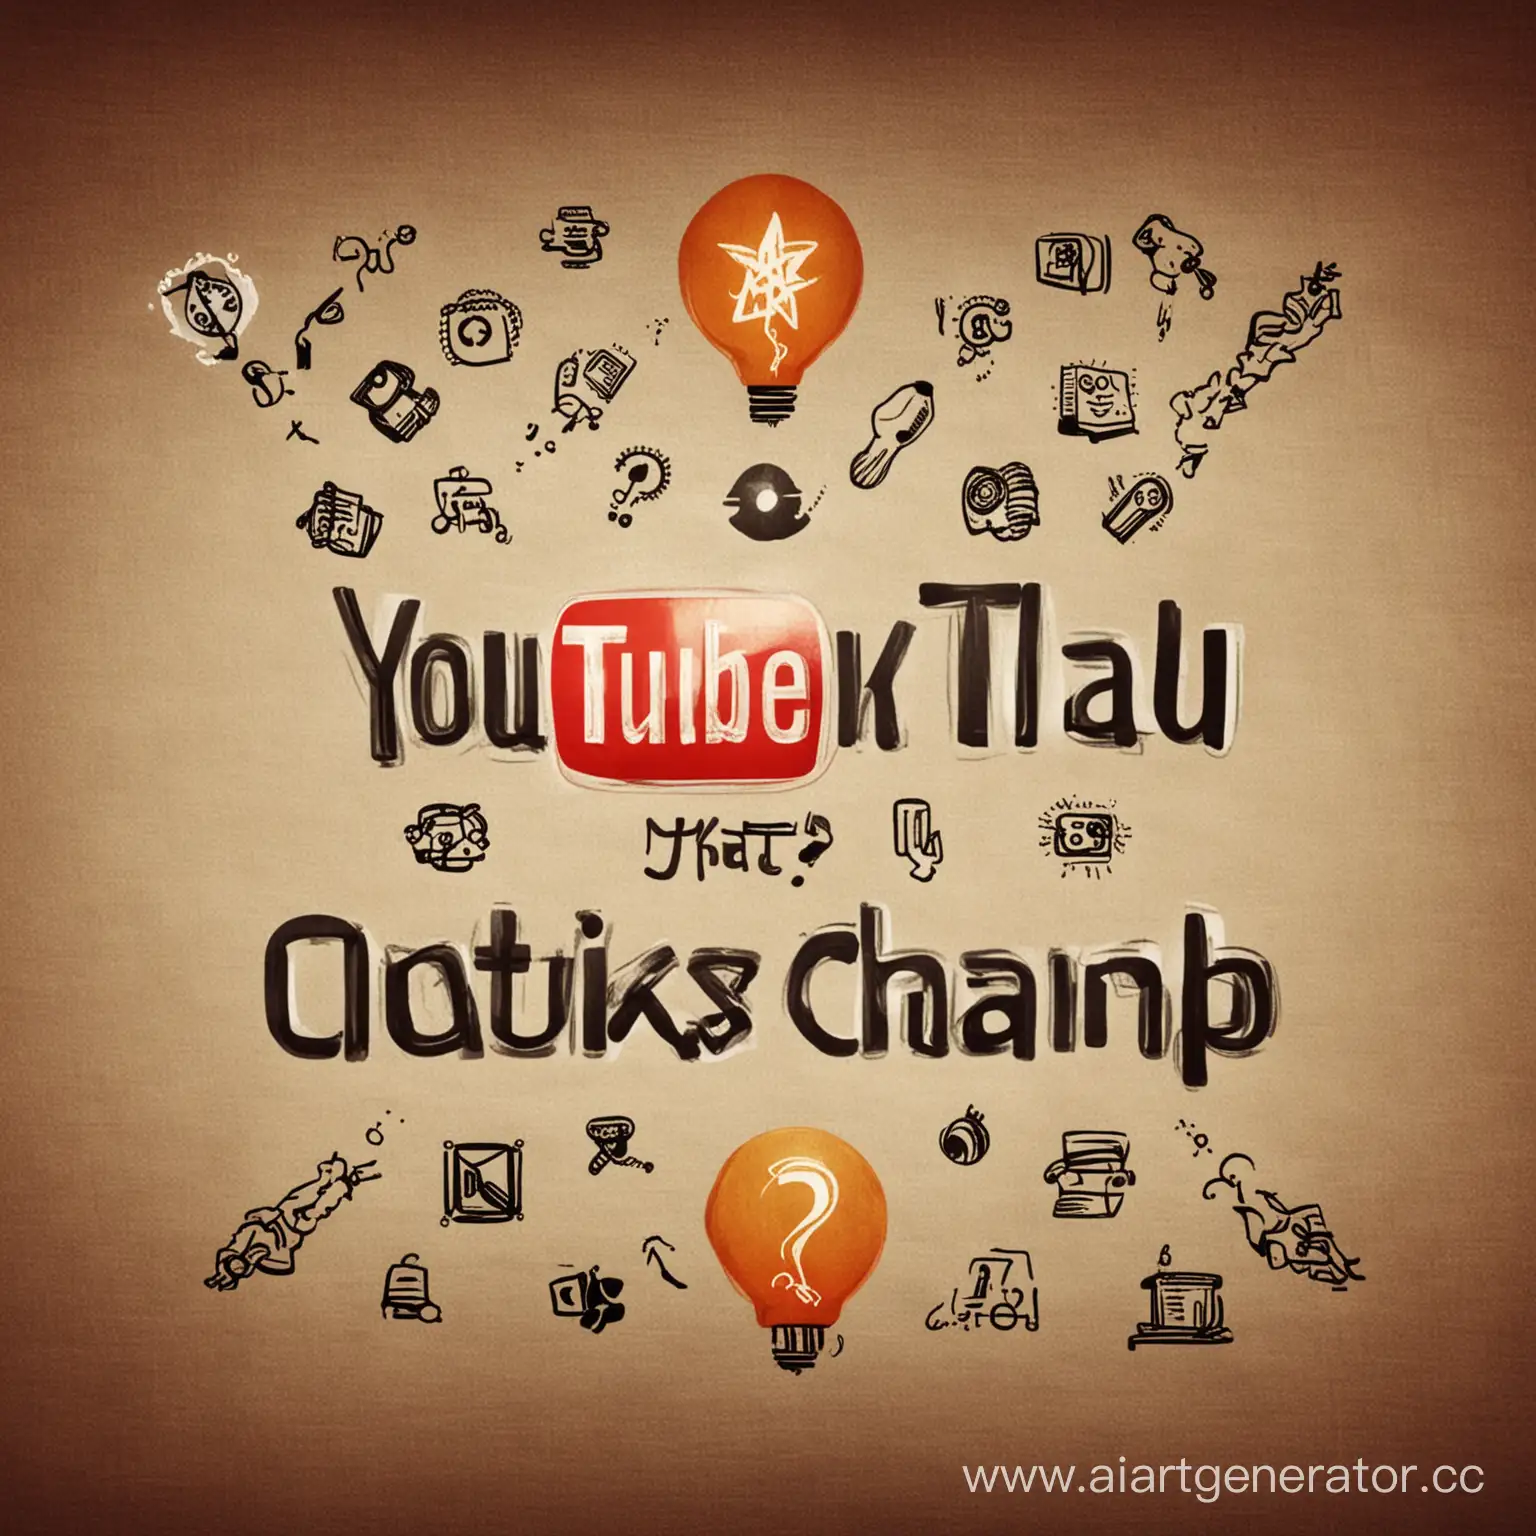 The logo for the YouTube channel for curious people called "Do You Know That...?" features symbols representing various fields of knowledge and many questions. 